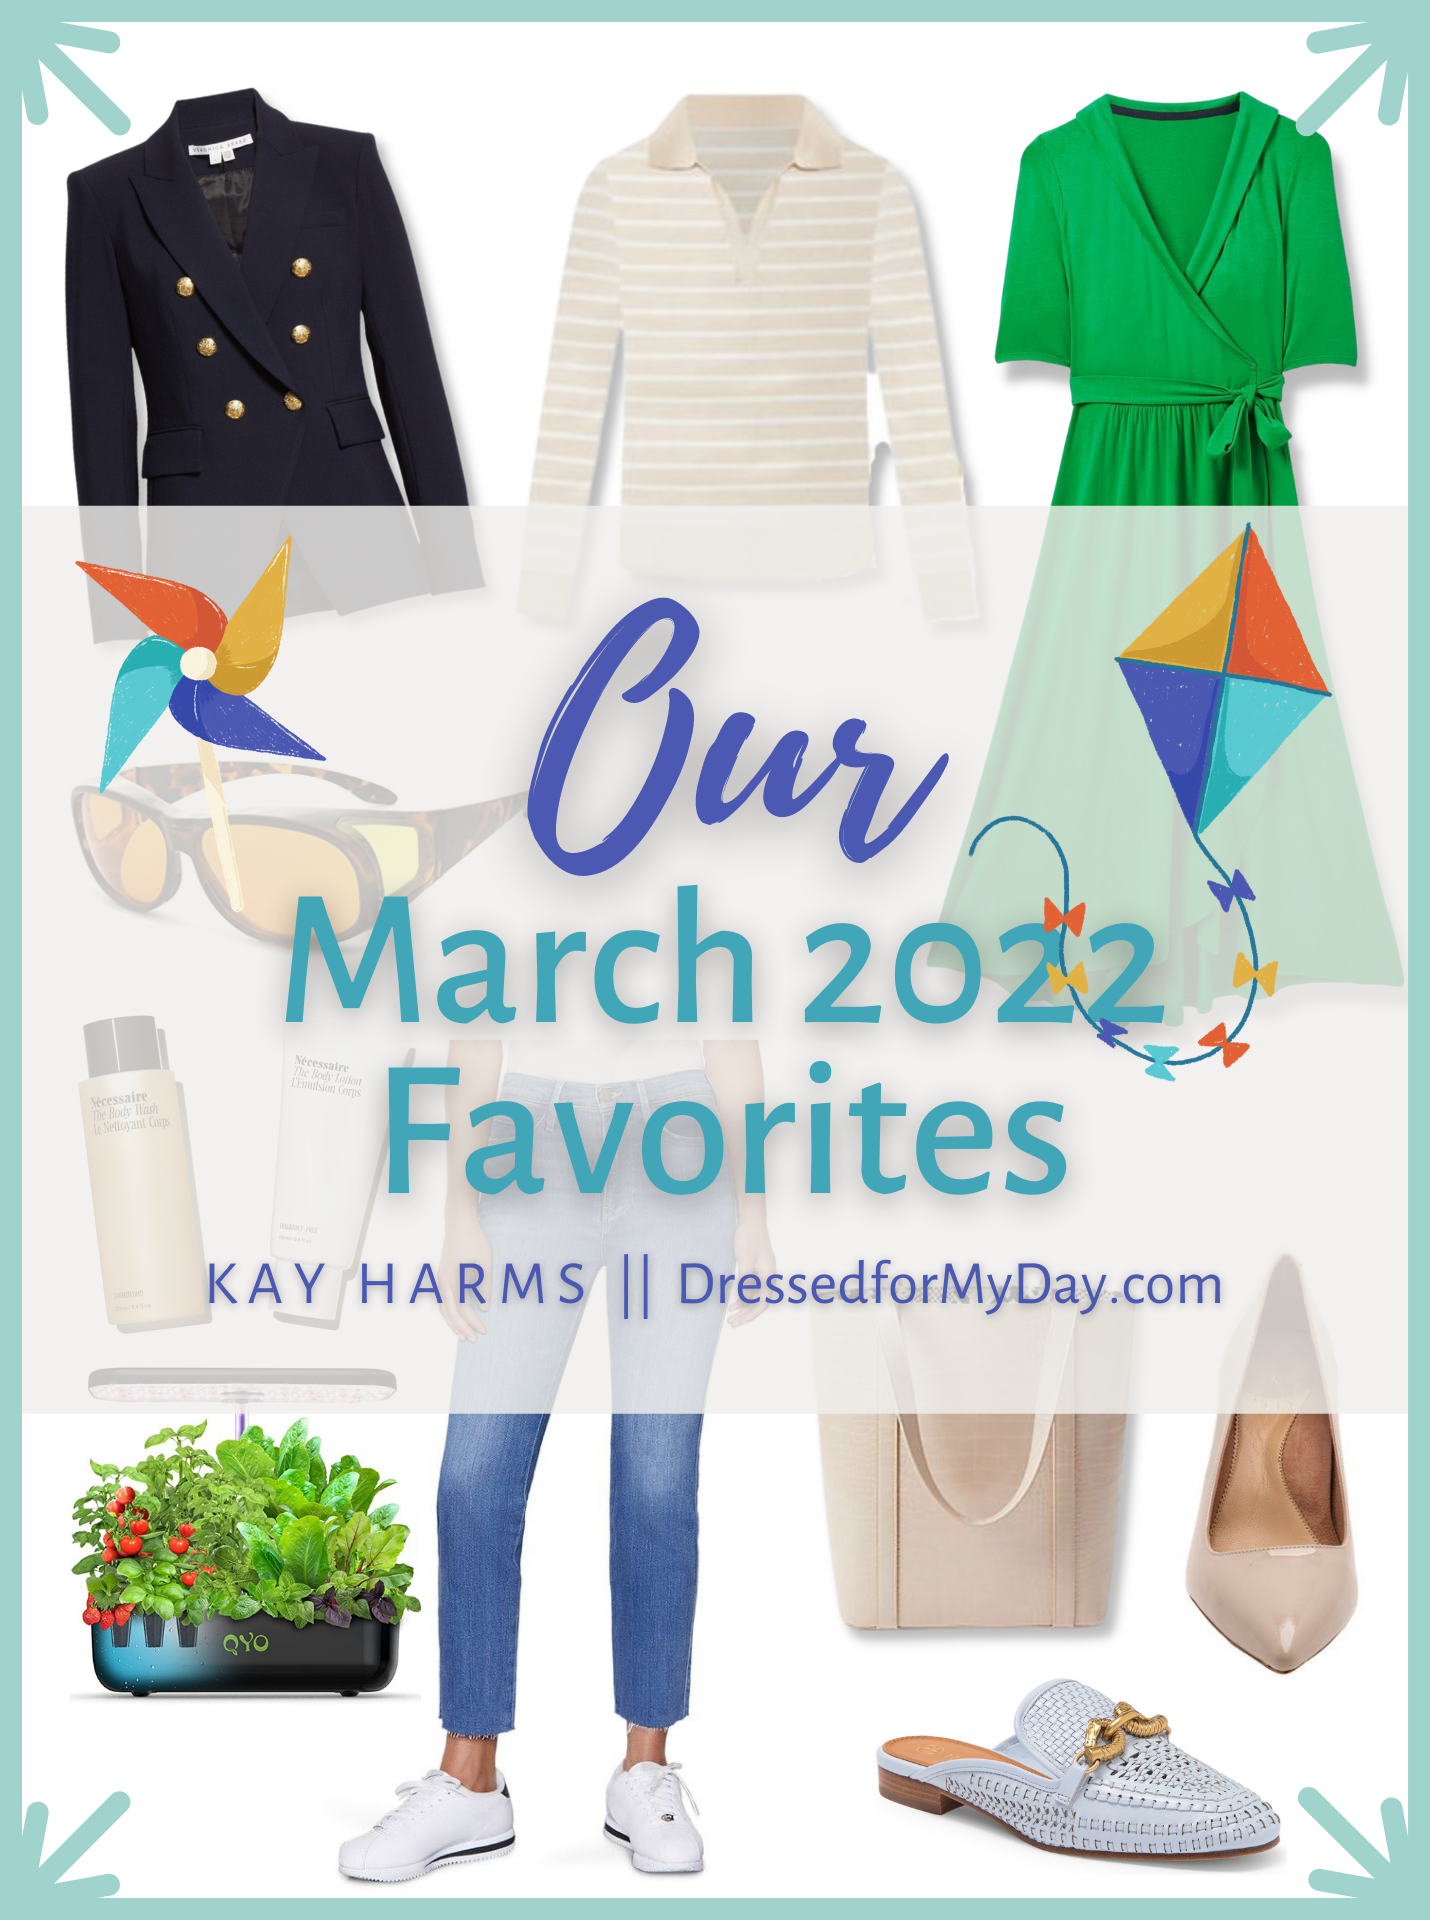 Our March 2022 Favorites